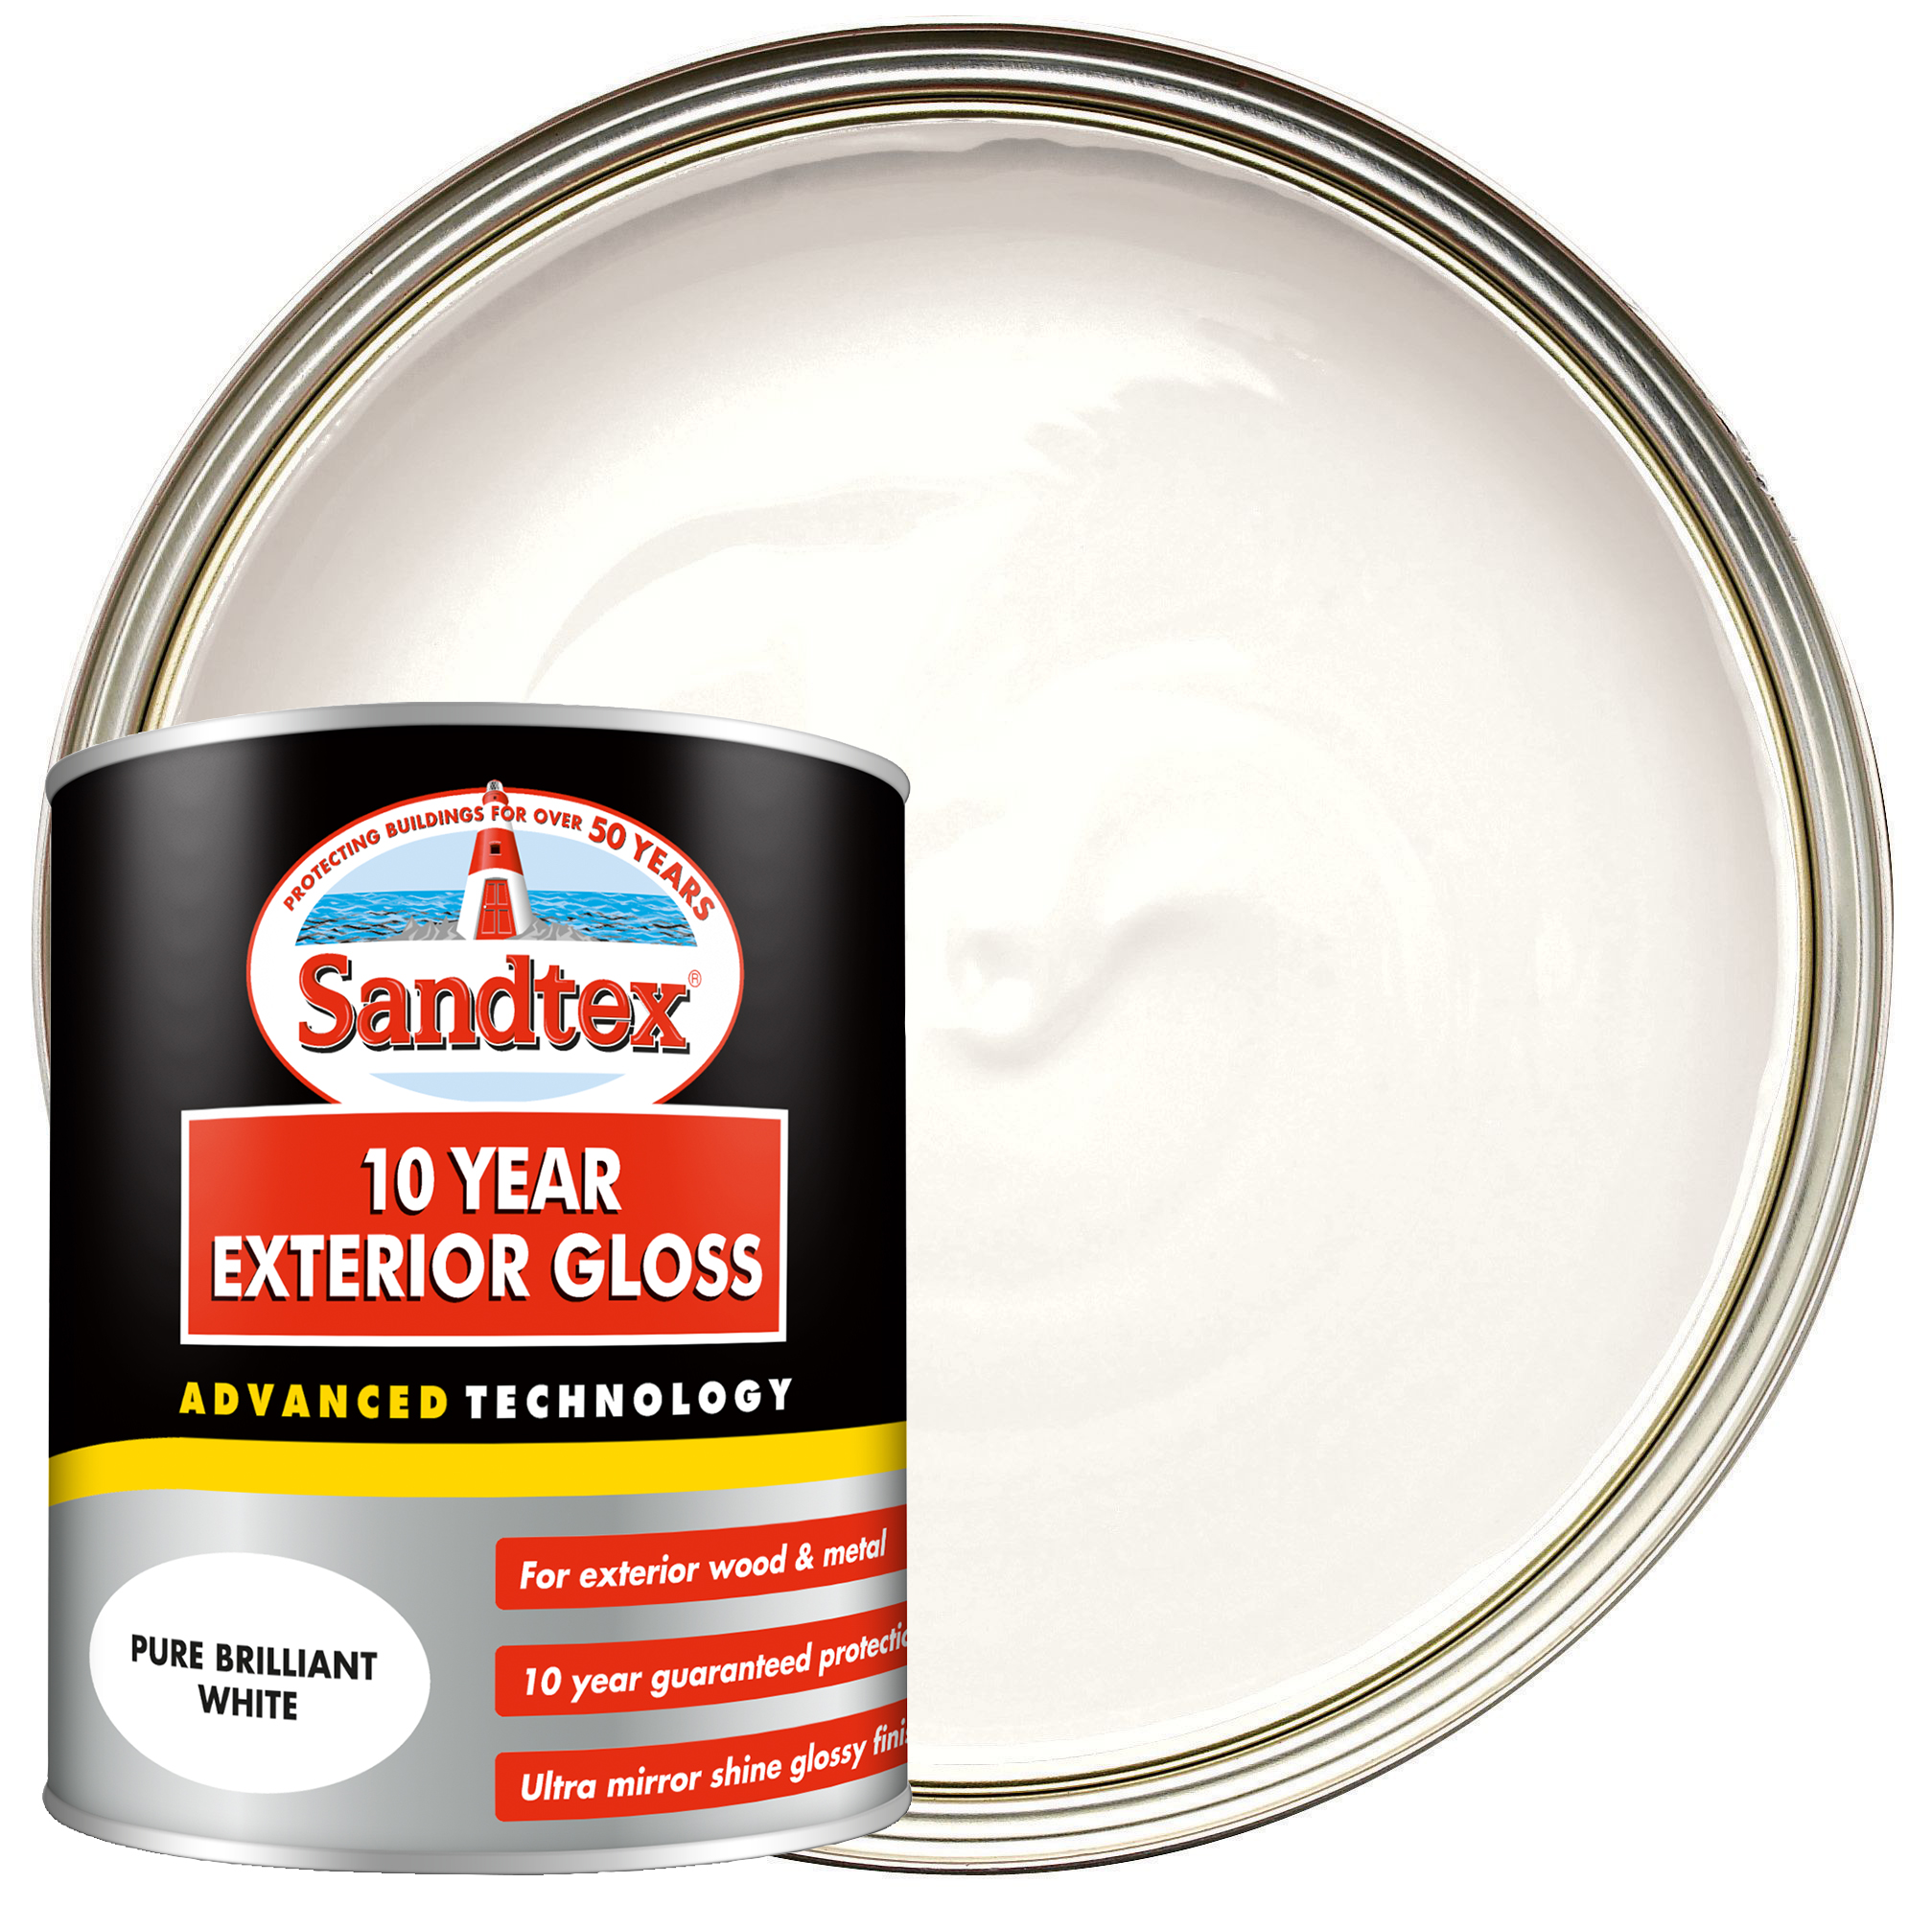 Image of Sandtex 10 Year Exterior Gloss Paint - Pure Brilliant White - 750ml